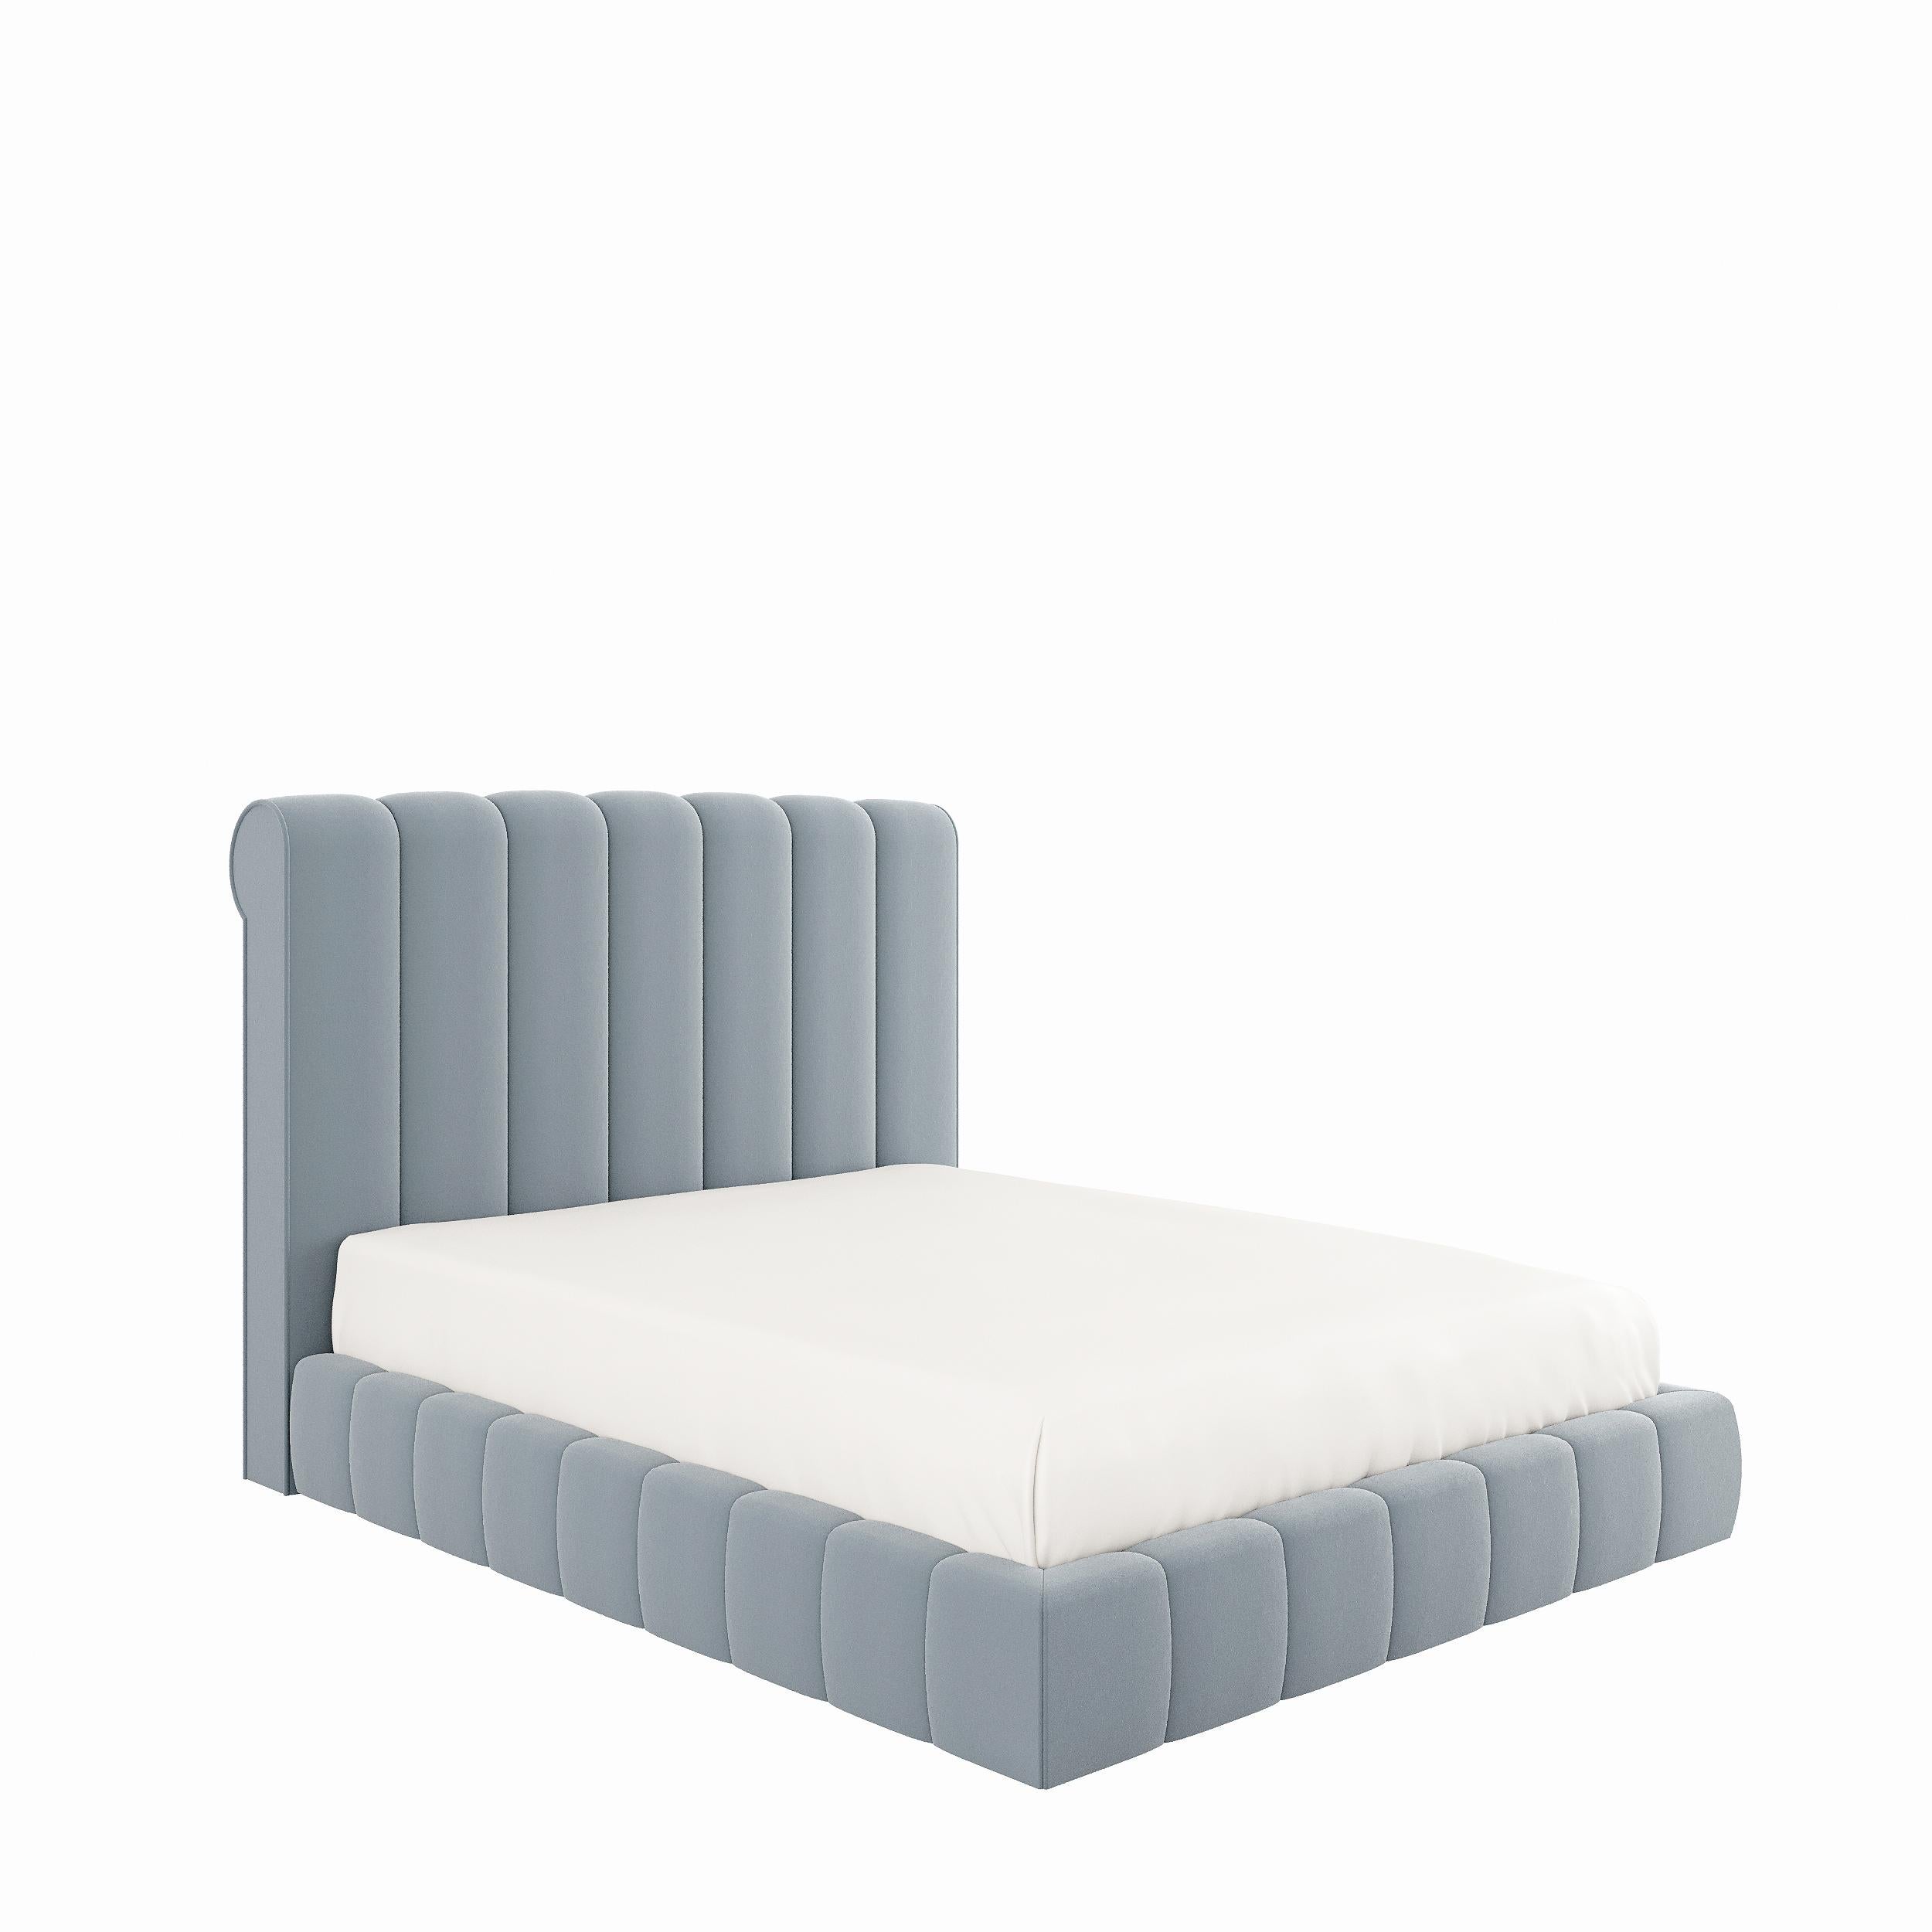 Fabric BRISA bed with upholstered headboard and base For Sale